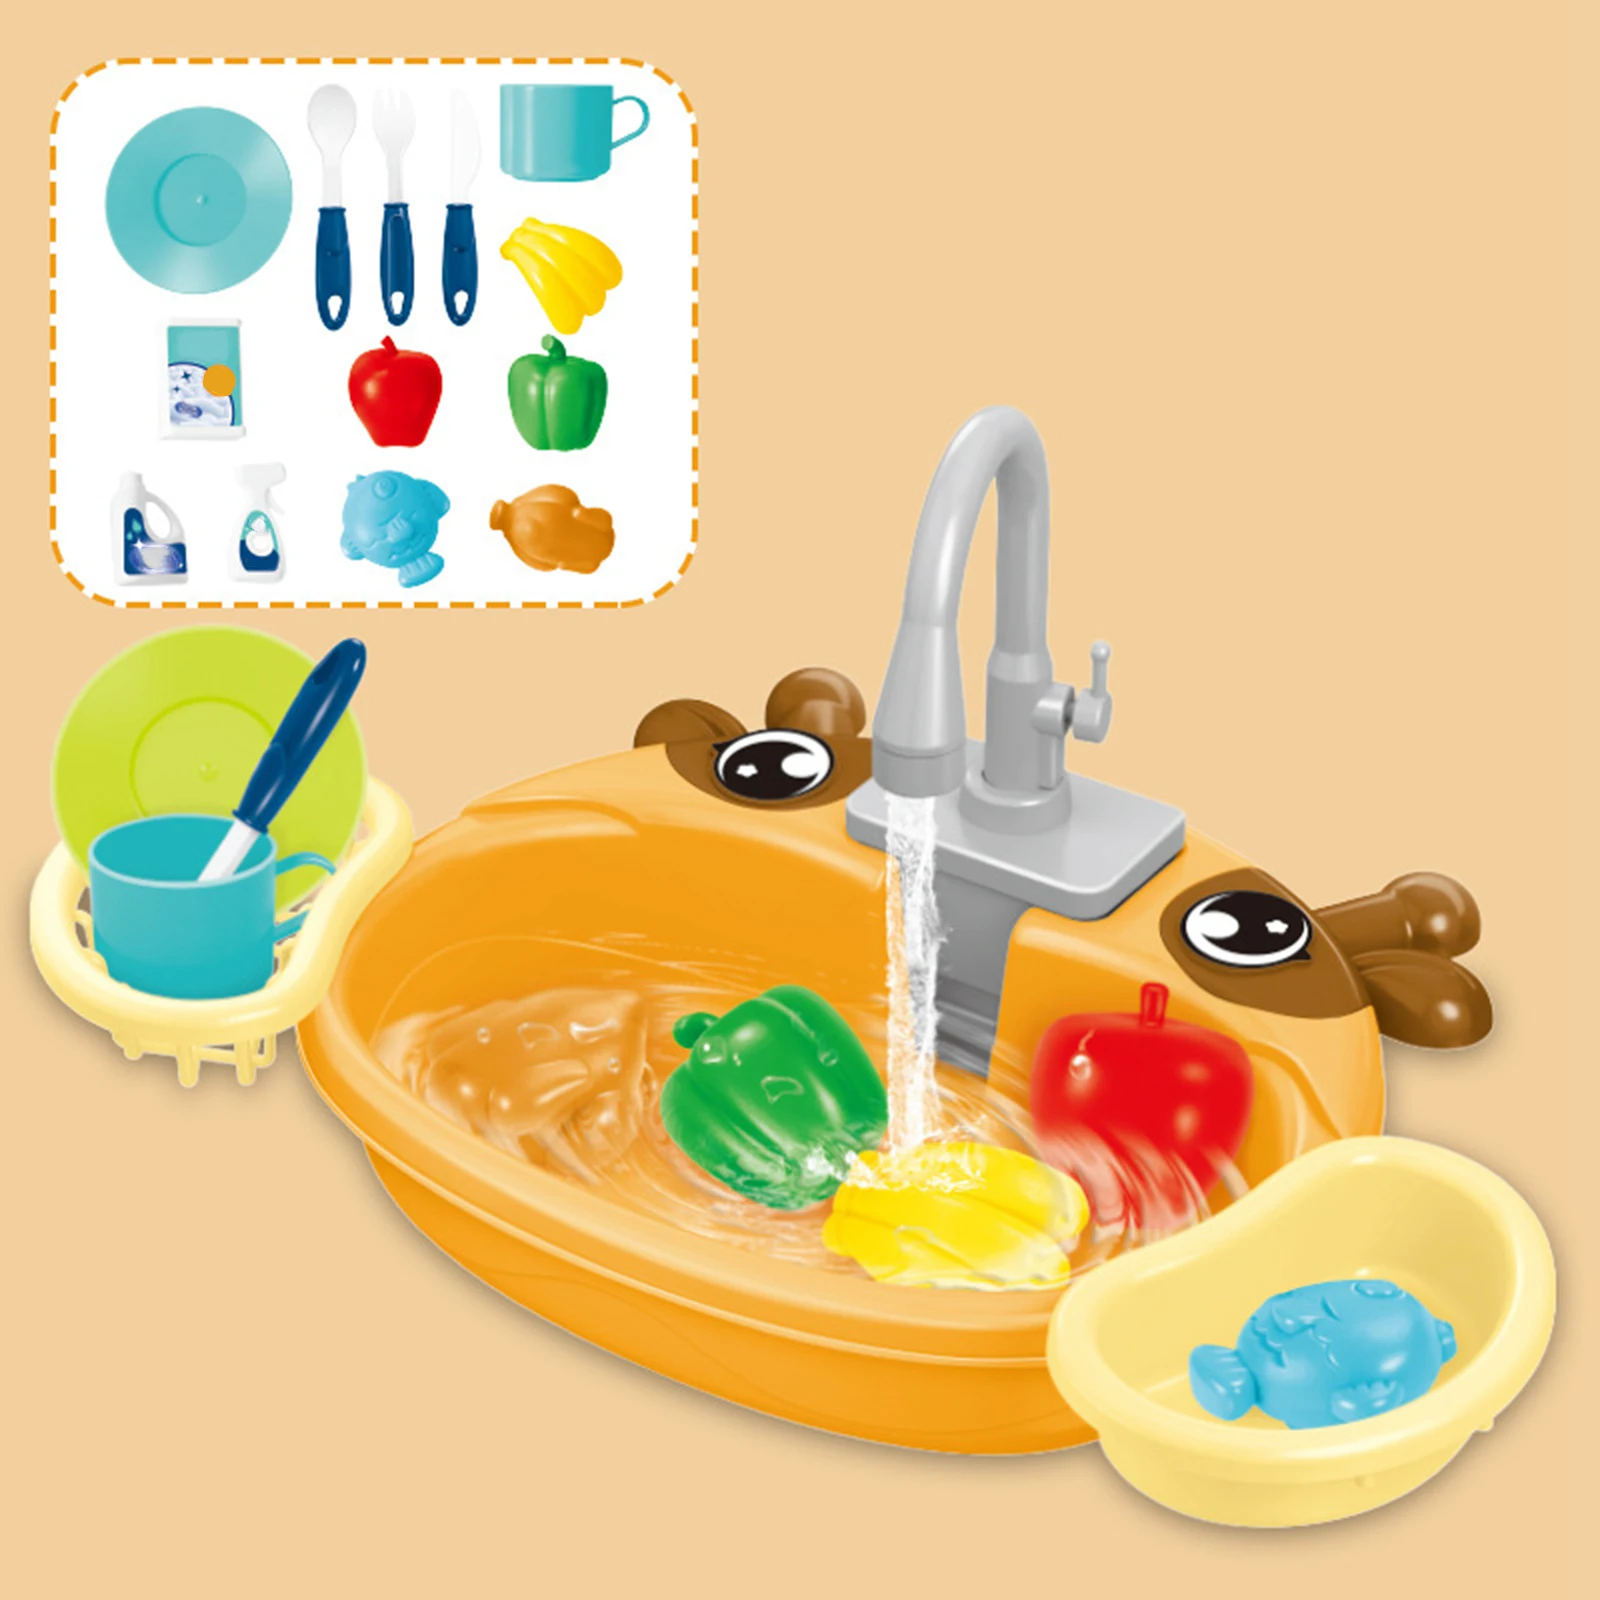 Kitchen Sink Toy Automatic Water Circuit System Sensory with Flowing Water Cleaning Montessori Sink Dishwashing Set for Kitchen